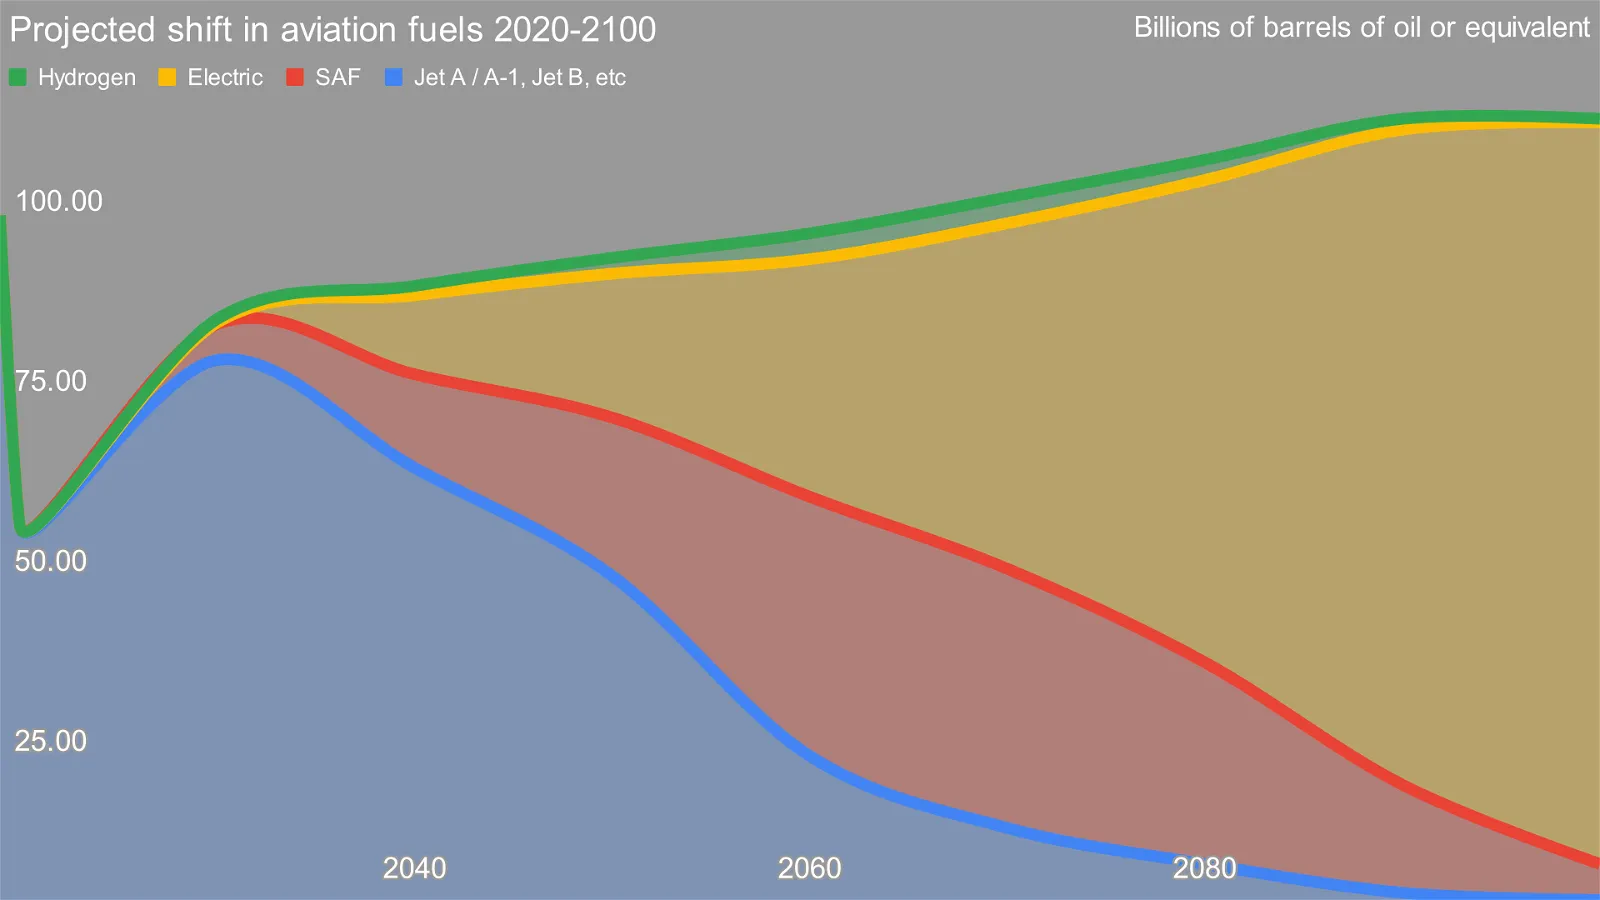 Projection of aviation energy demand by type through 2100 by Michael Barnard, Chief Strategist, Clean Technica